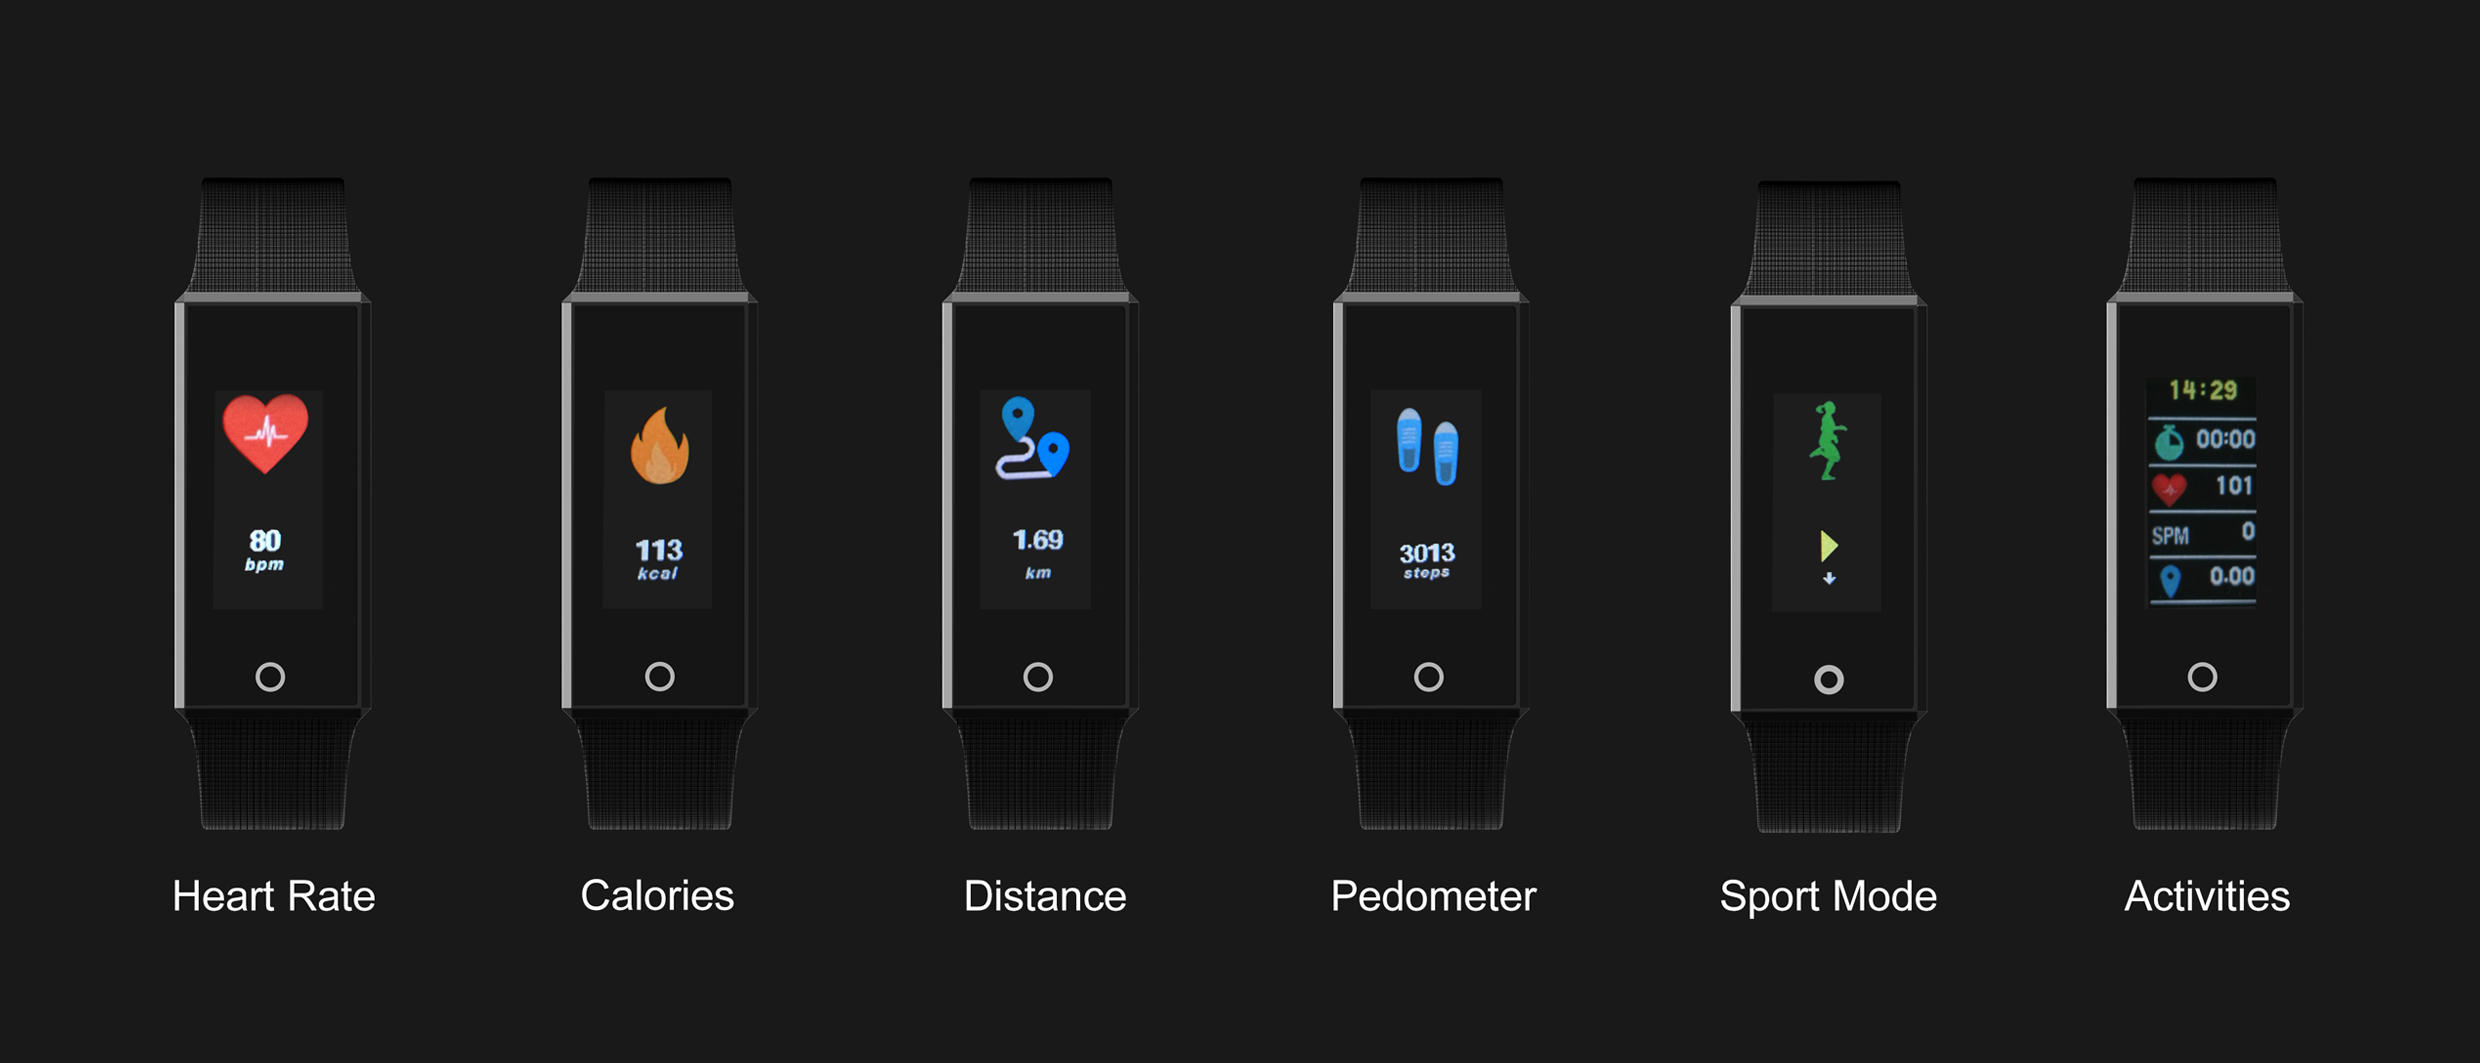 Omniband HR fitness trackers from OAXIS